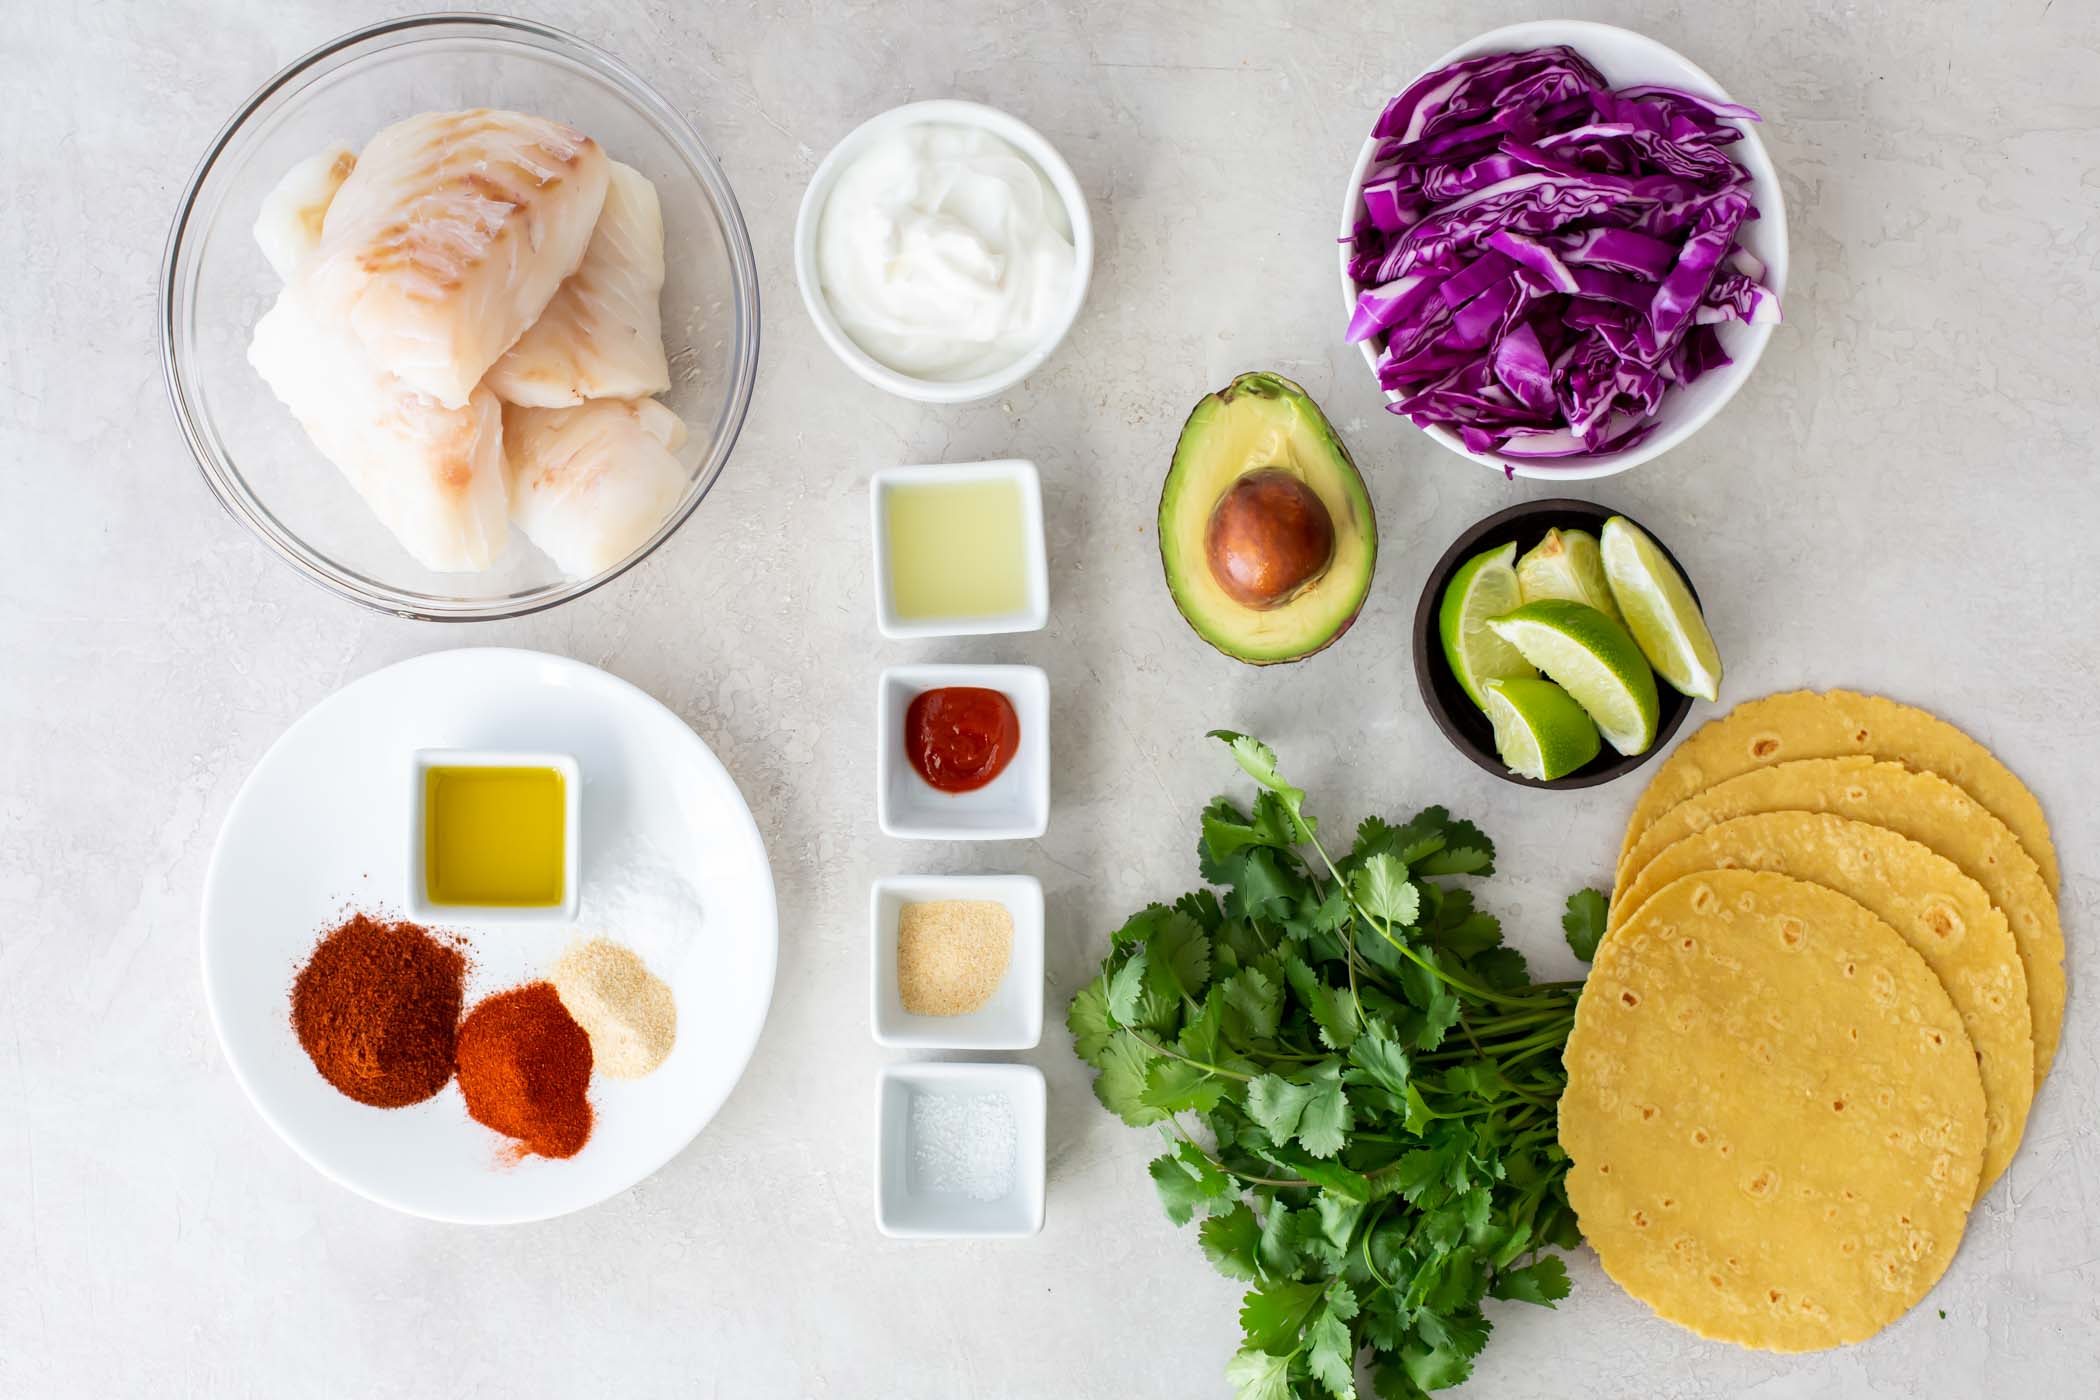 Ingredients for fish tacos recipe.